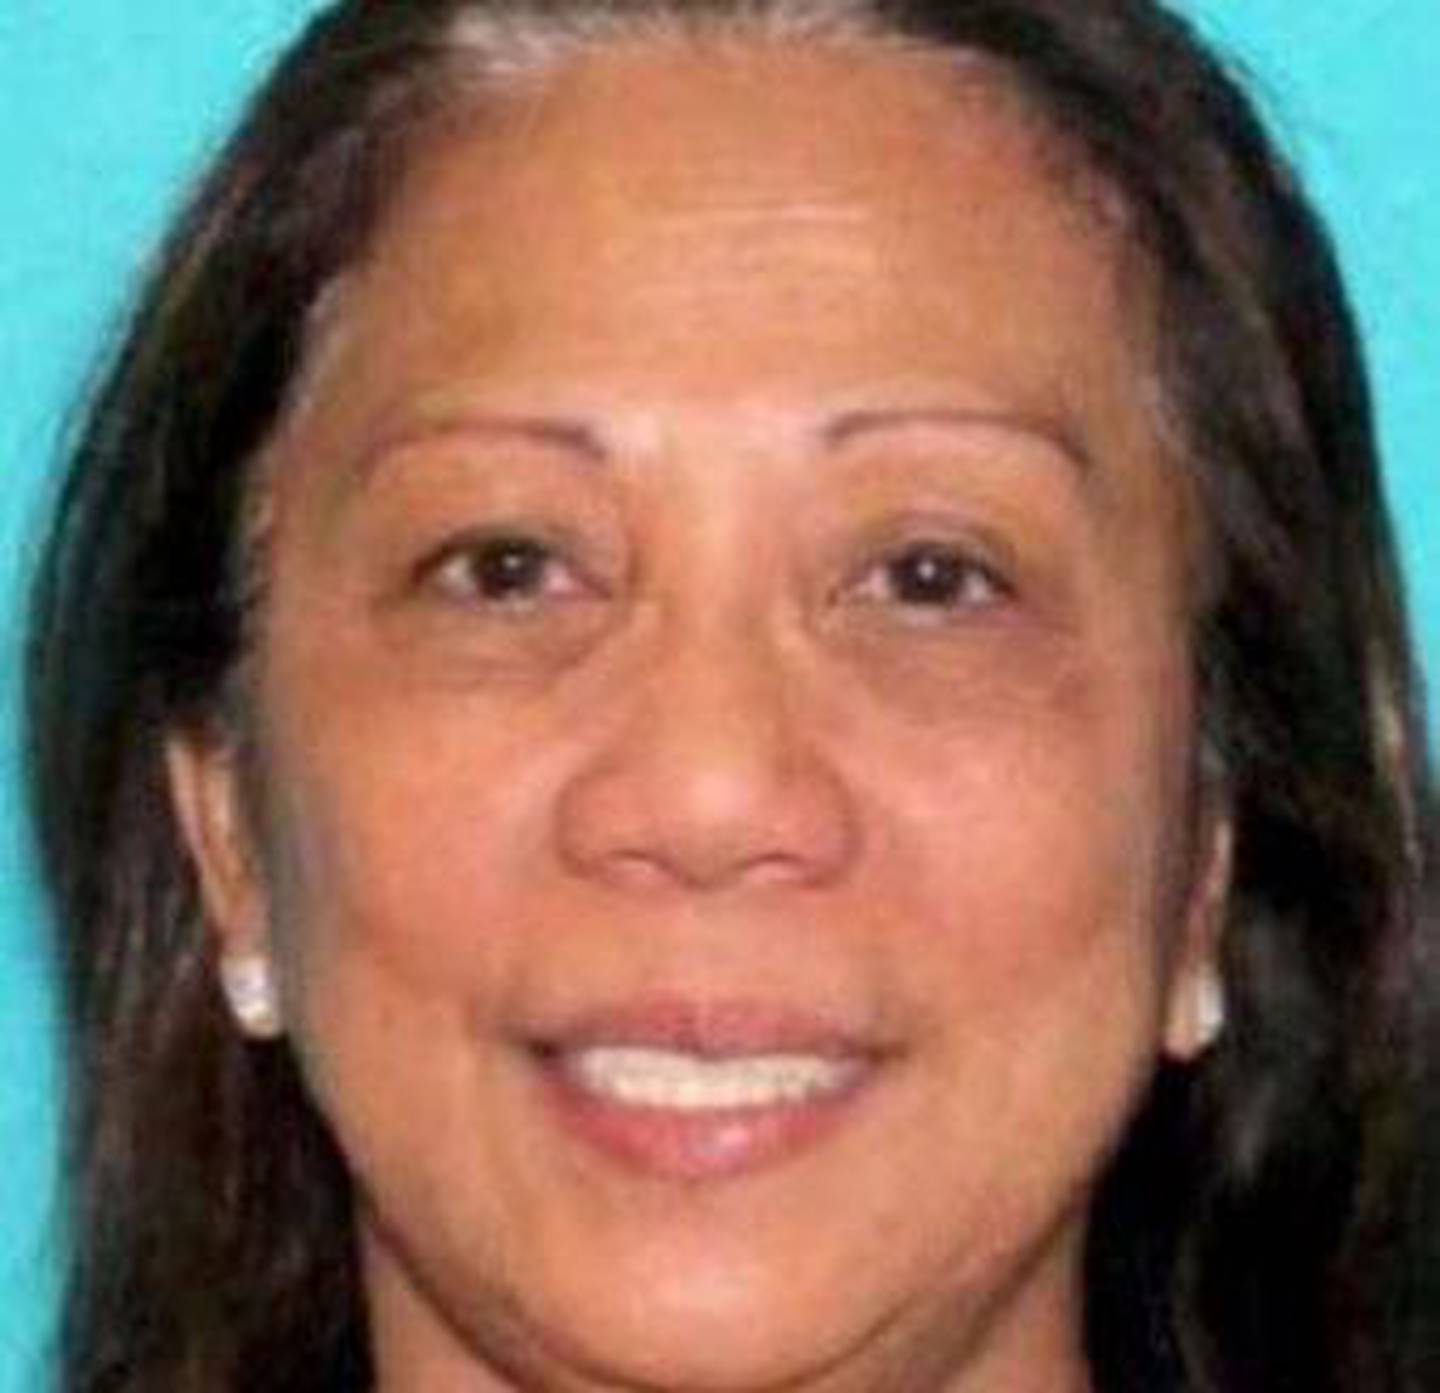 Marilou Danley arrived in Los Angeles from Manila on Wednesday morning. She is a person of interest in the case of the Las Vegas shooting, when her long-term boyfriend, Stephen Paddock, killed more than 50 people. This is an image of her released by the Las Vegas Metro Police Department. Reuters